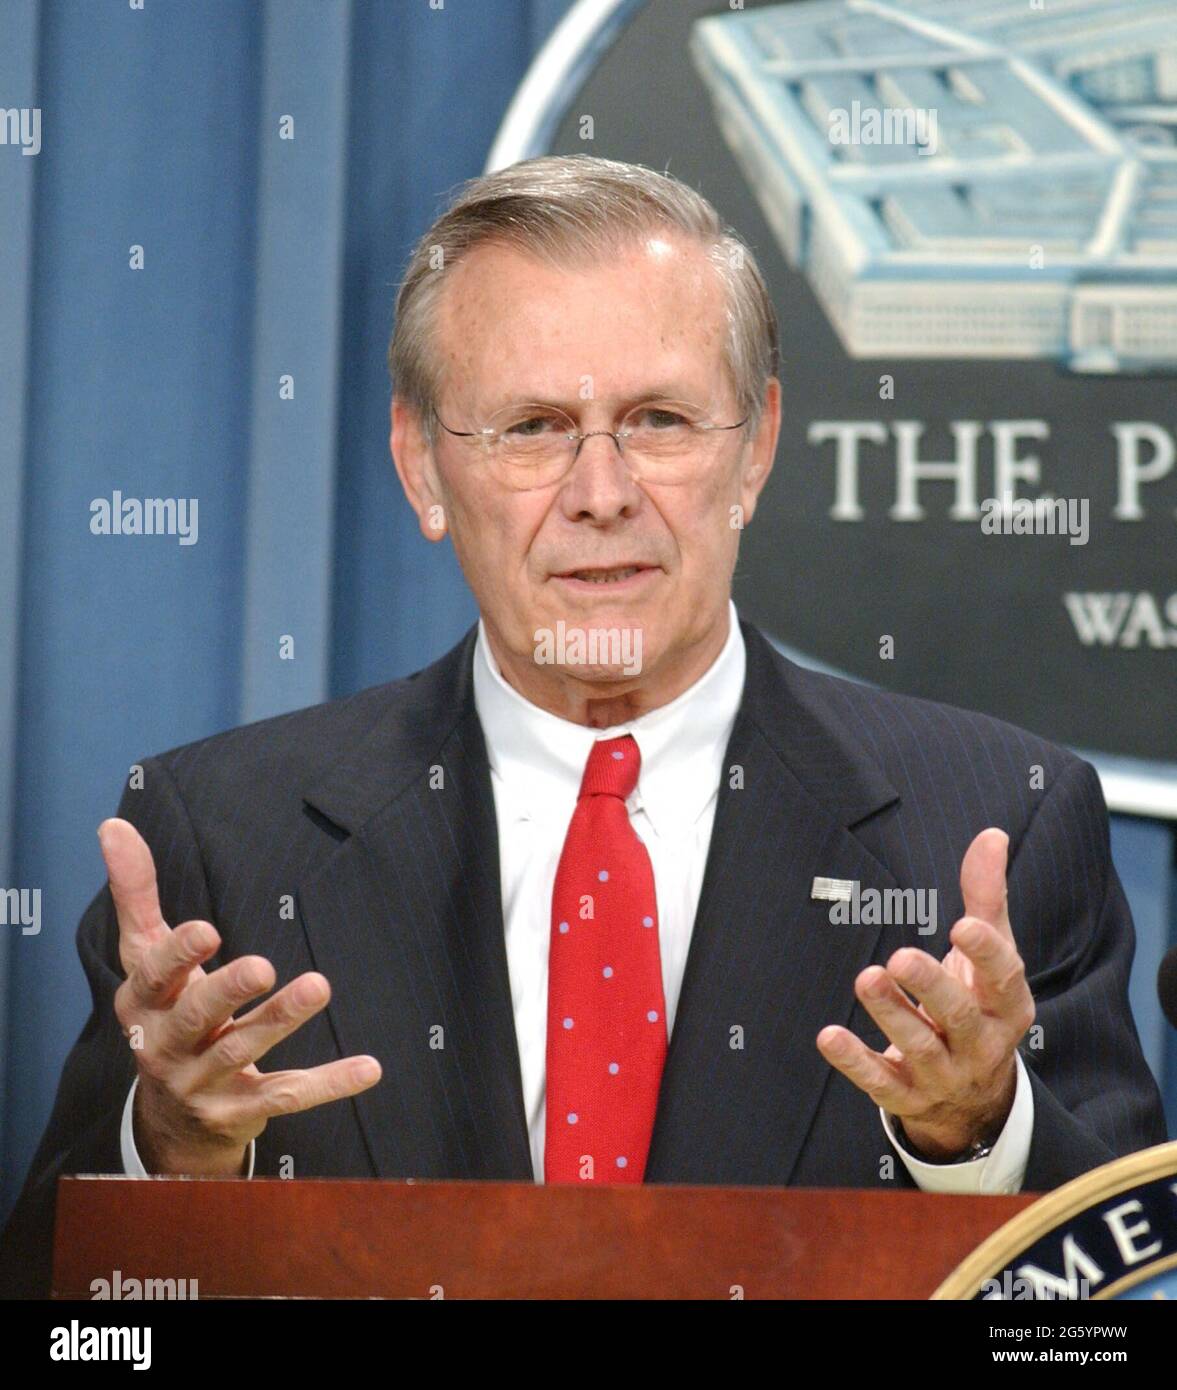 File photo dated March 20, 2003 of U.S. Secretary of Defense Donald Rumsfeld and Chairman of the Joint Chiefs of Staff Richard Myers brief reporters at the Pentagon in Washington, DC, USA. Donald Rumsfeld, the acerbic architect of the Iraq war and a master Washington power player who served as US secretary of defense for two presidents, has died at the age of 88. Photo by Ron Sachs/CNP/ABACAPRESS.COM Stock Photo